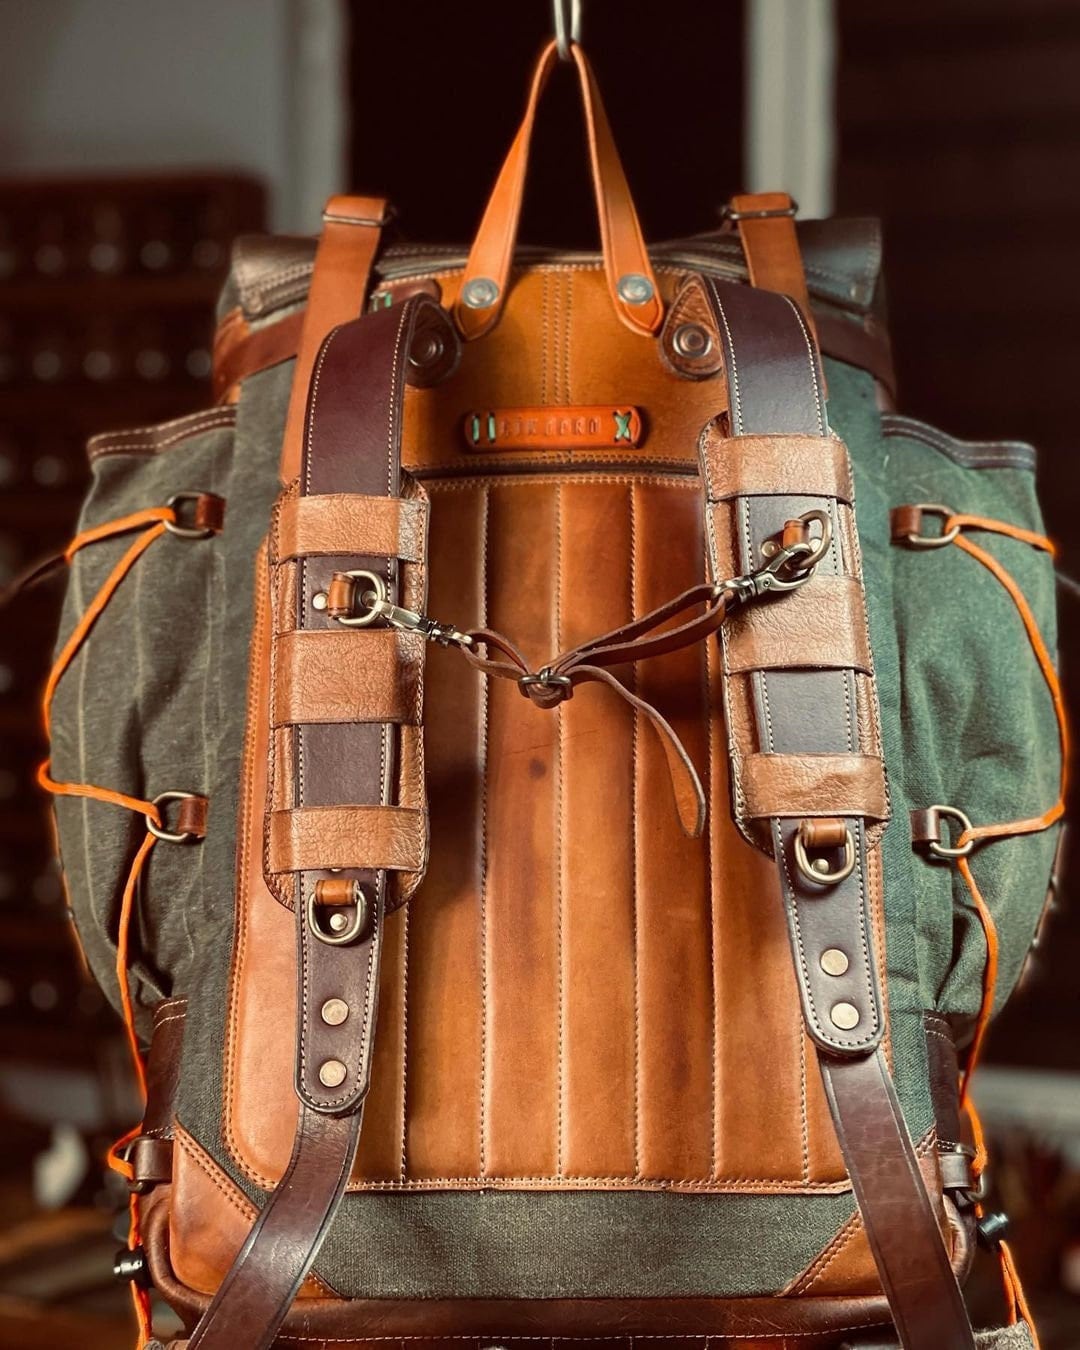 Bestseller | Limited discount | 45L | Handmade Leather backpack | Waxed Canvas Backpack | Travel, Camping, Bushcraft | Personalization bushcraft - camping - hiking backpack 99percenthandmade   